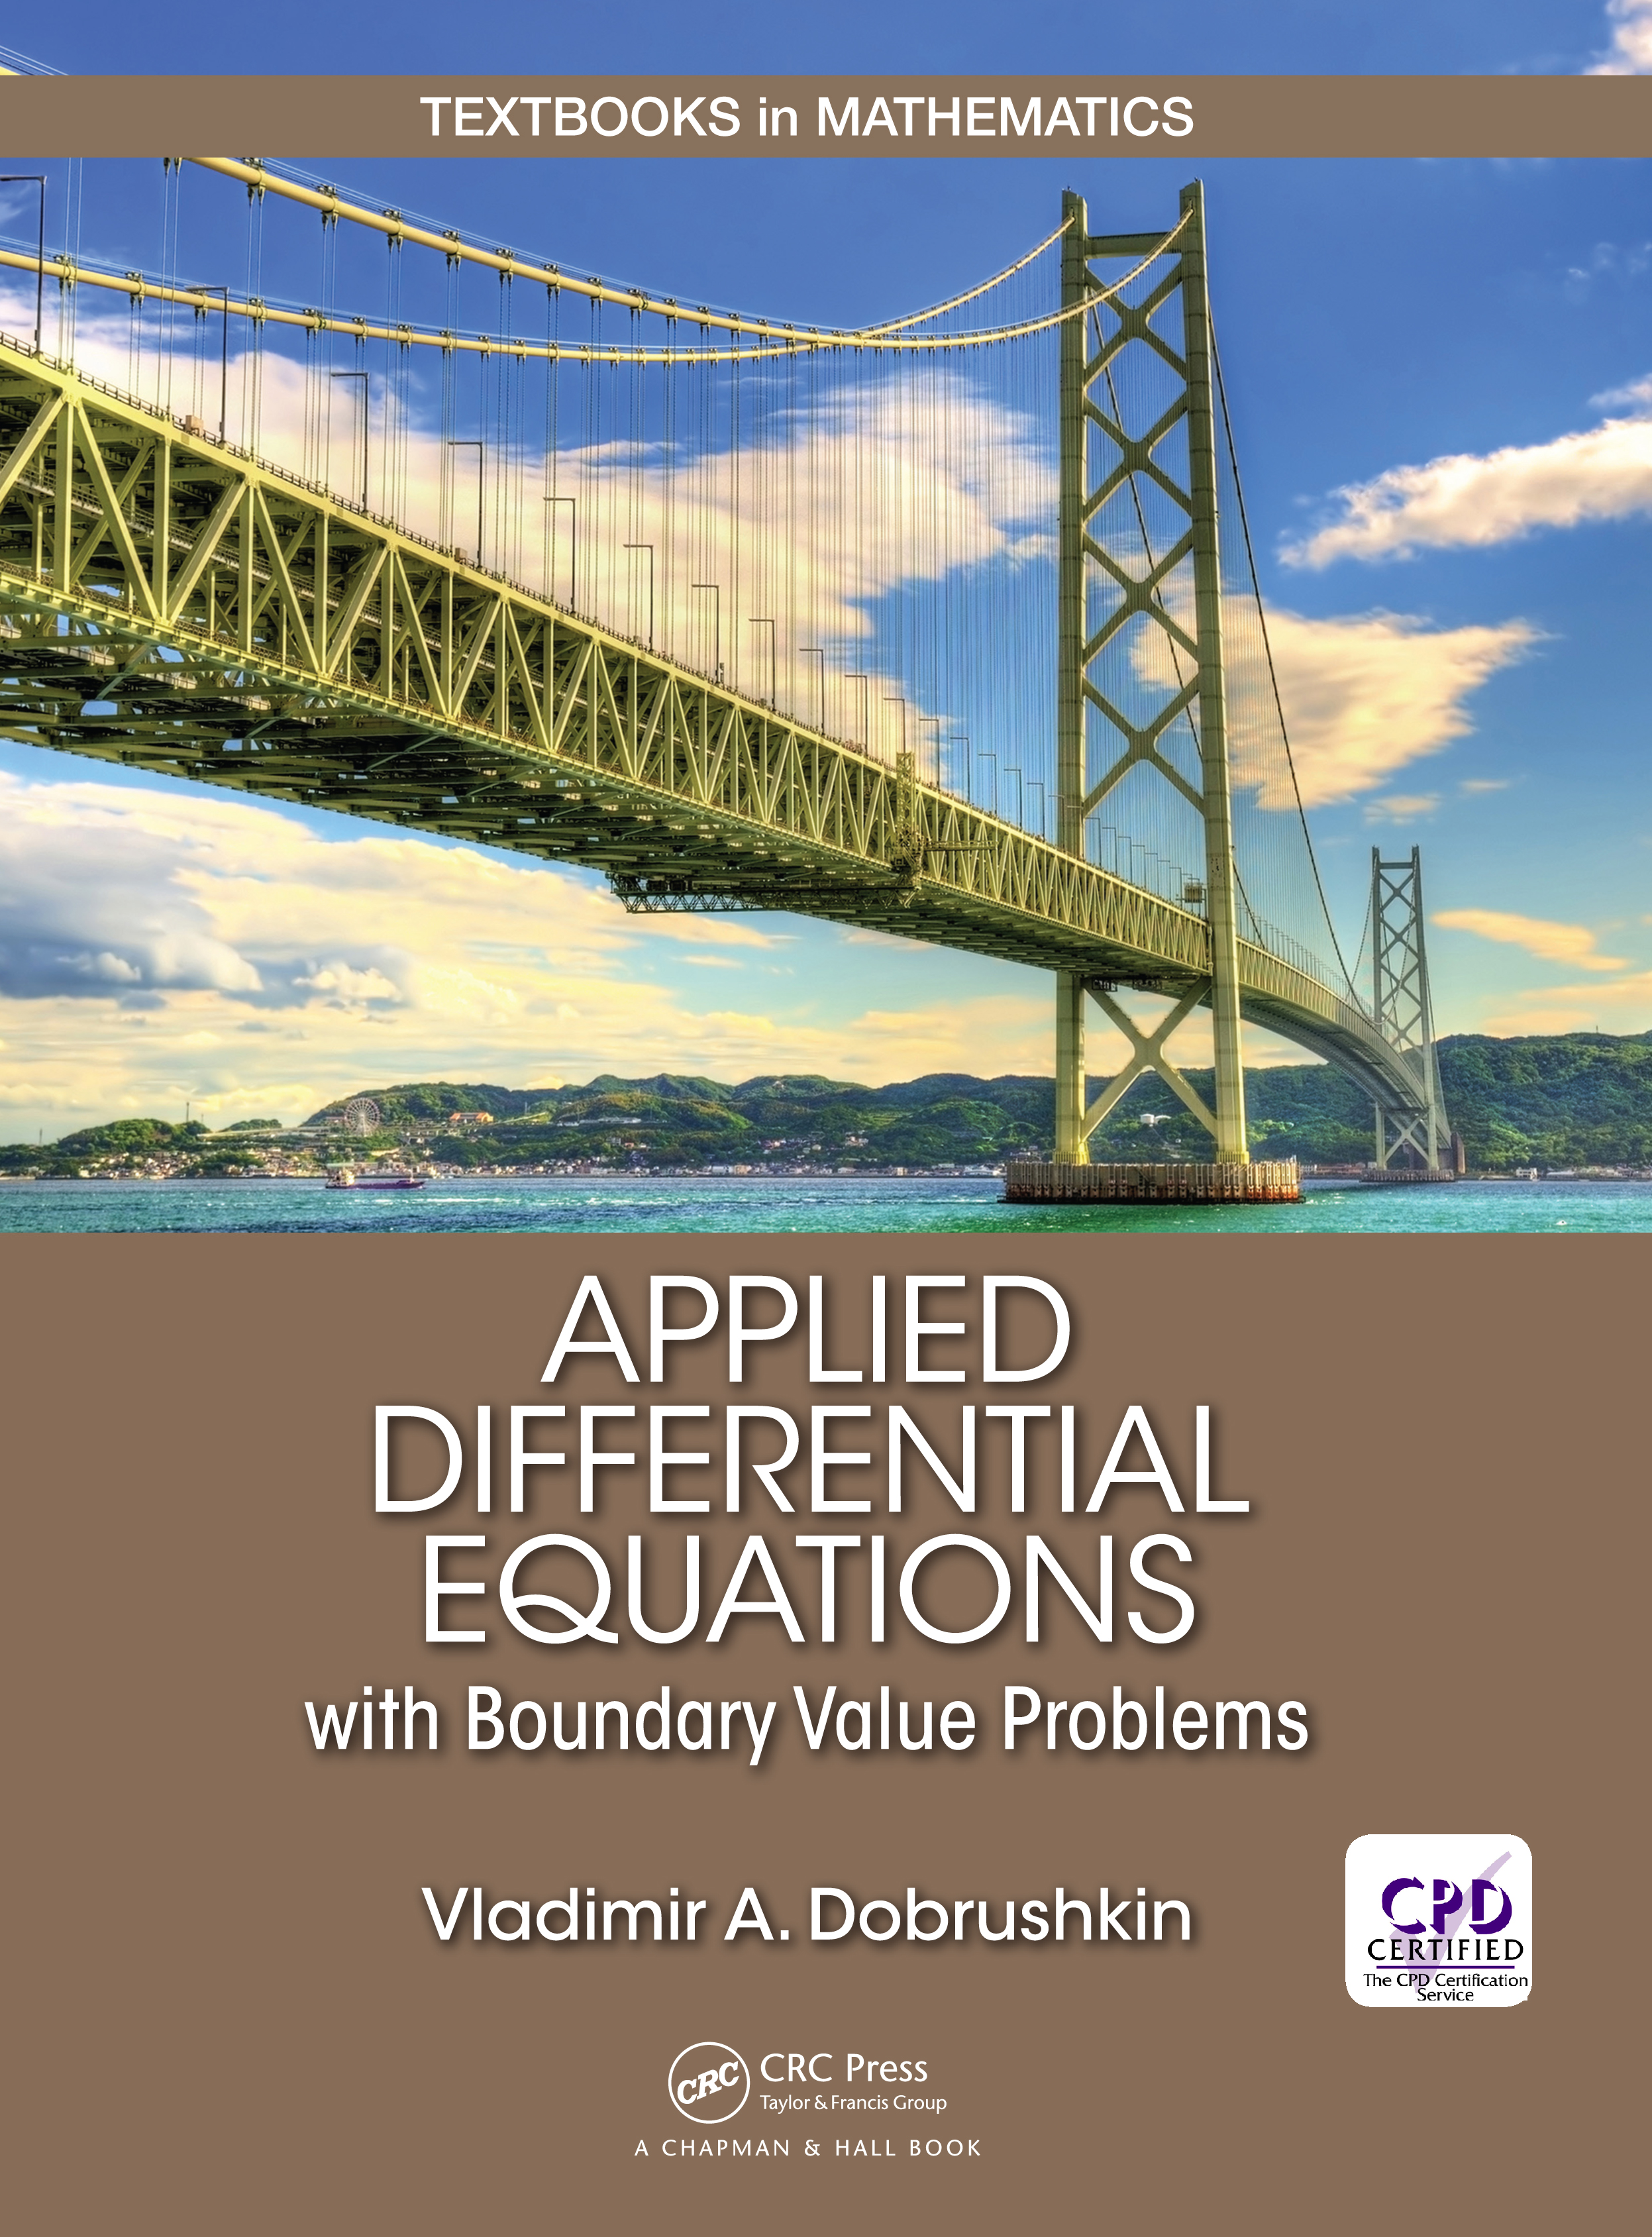 Non-homogeneous Boundary value problems and applications. Elementary Differential equations and Boundary value problems, Boyce and DIPRIMA, 10th ed., 2010.